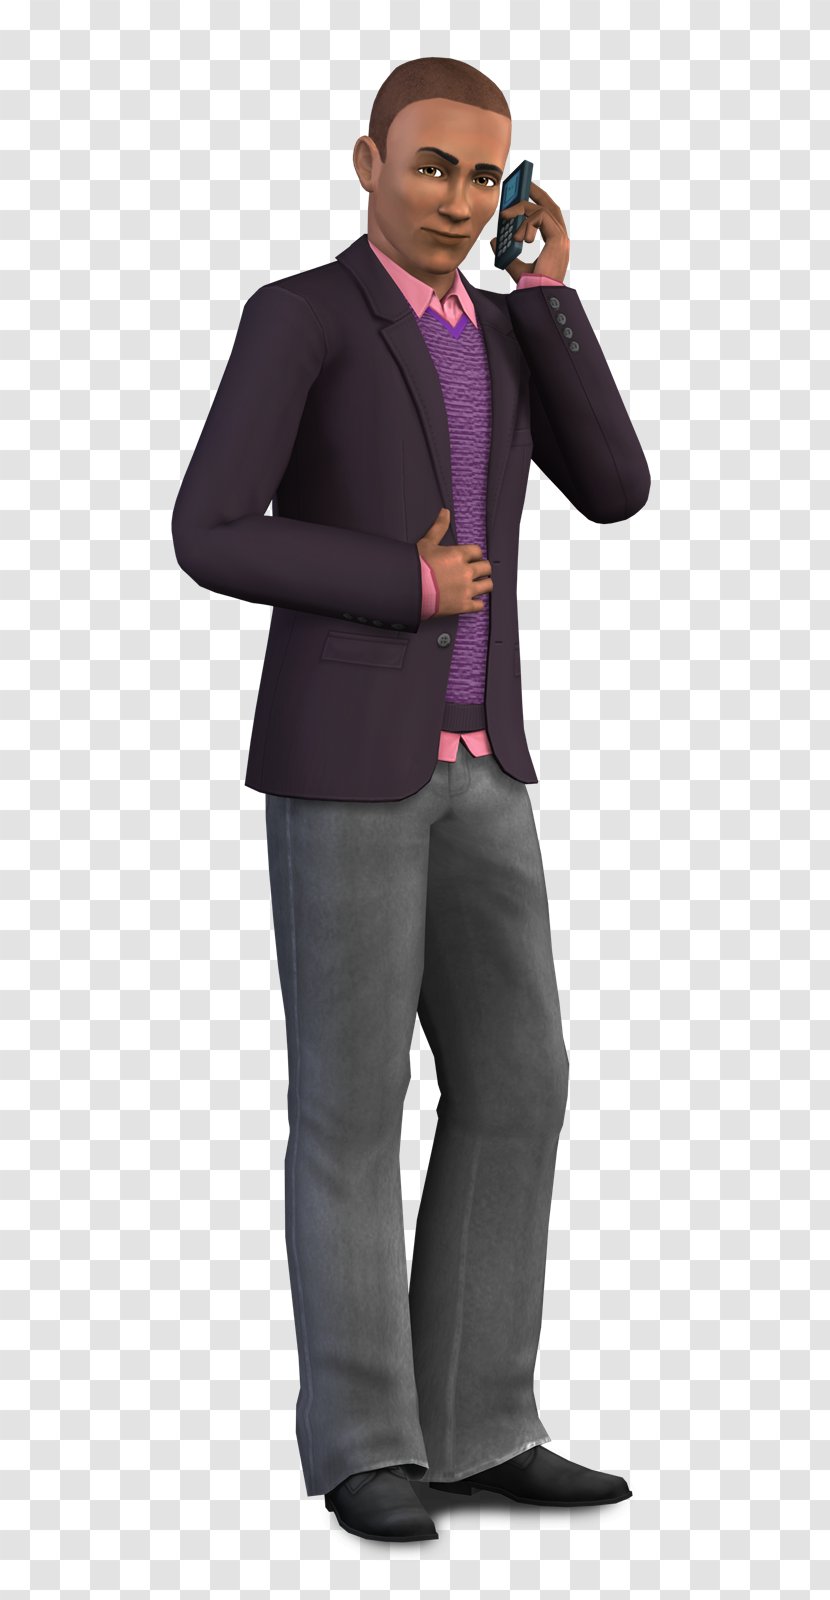 The Sims 3: Late Night 4 2 Rendering - Gentleman Transparent PNG